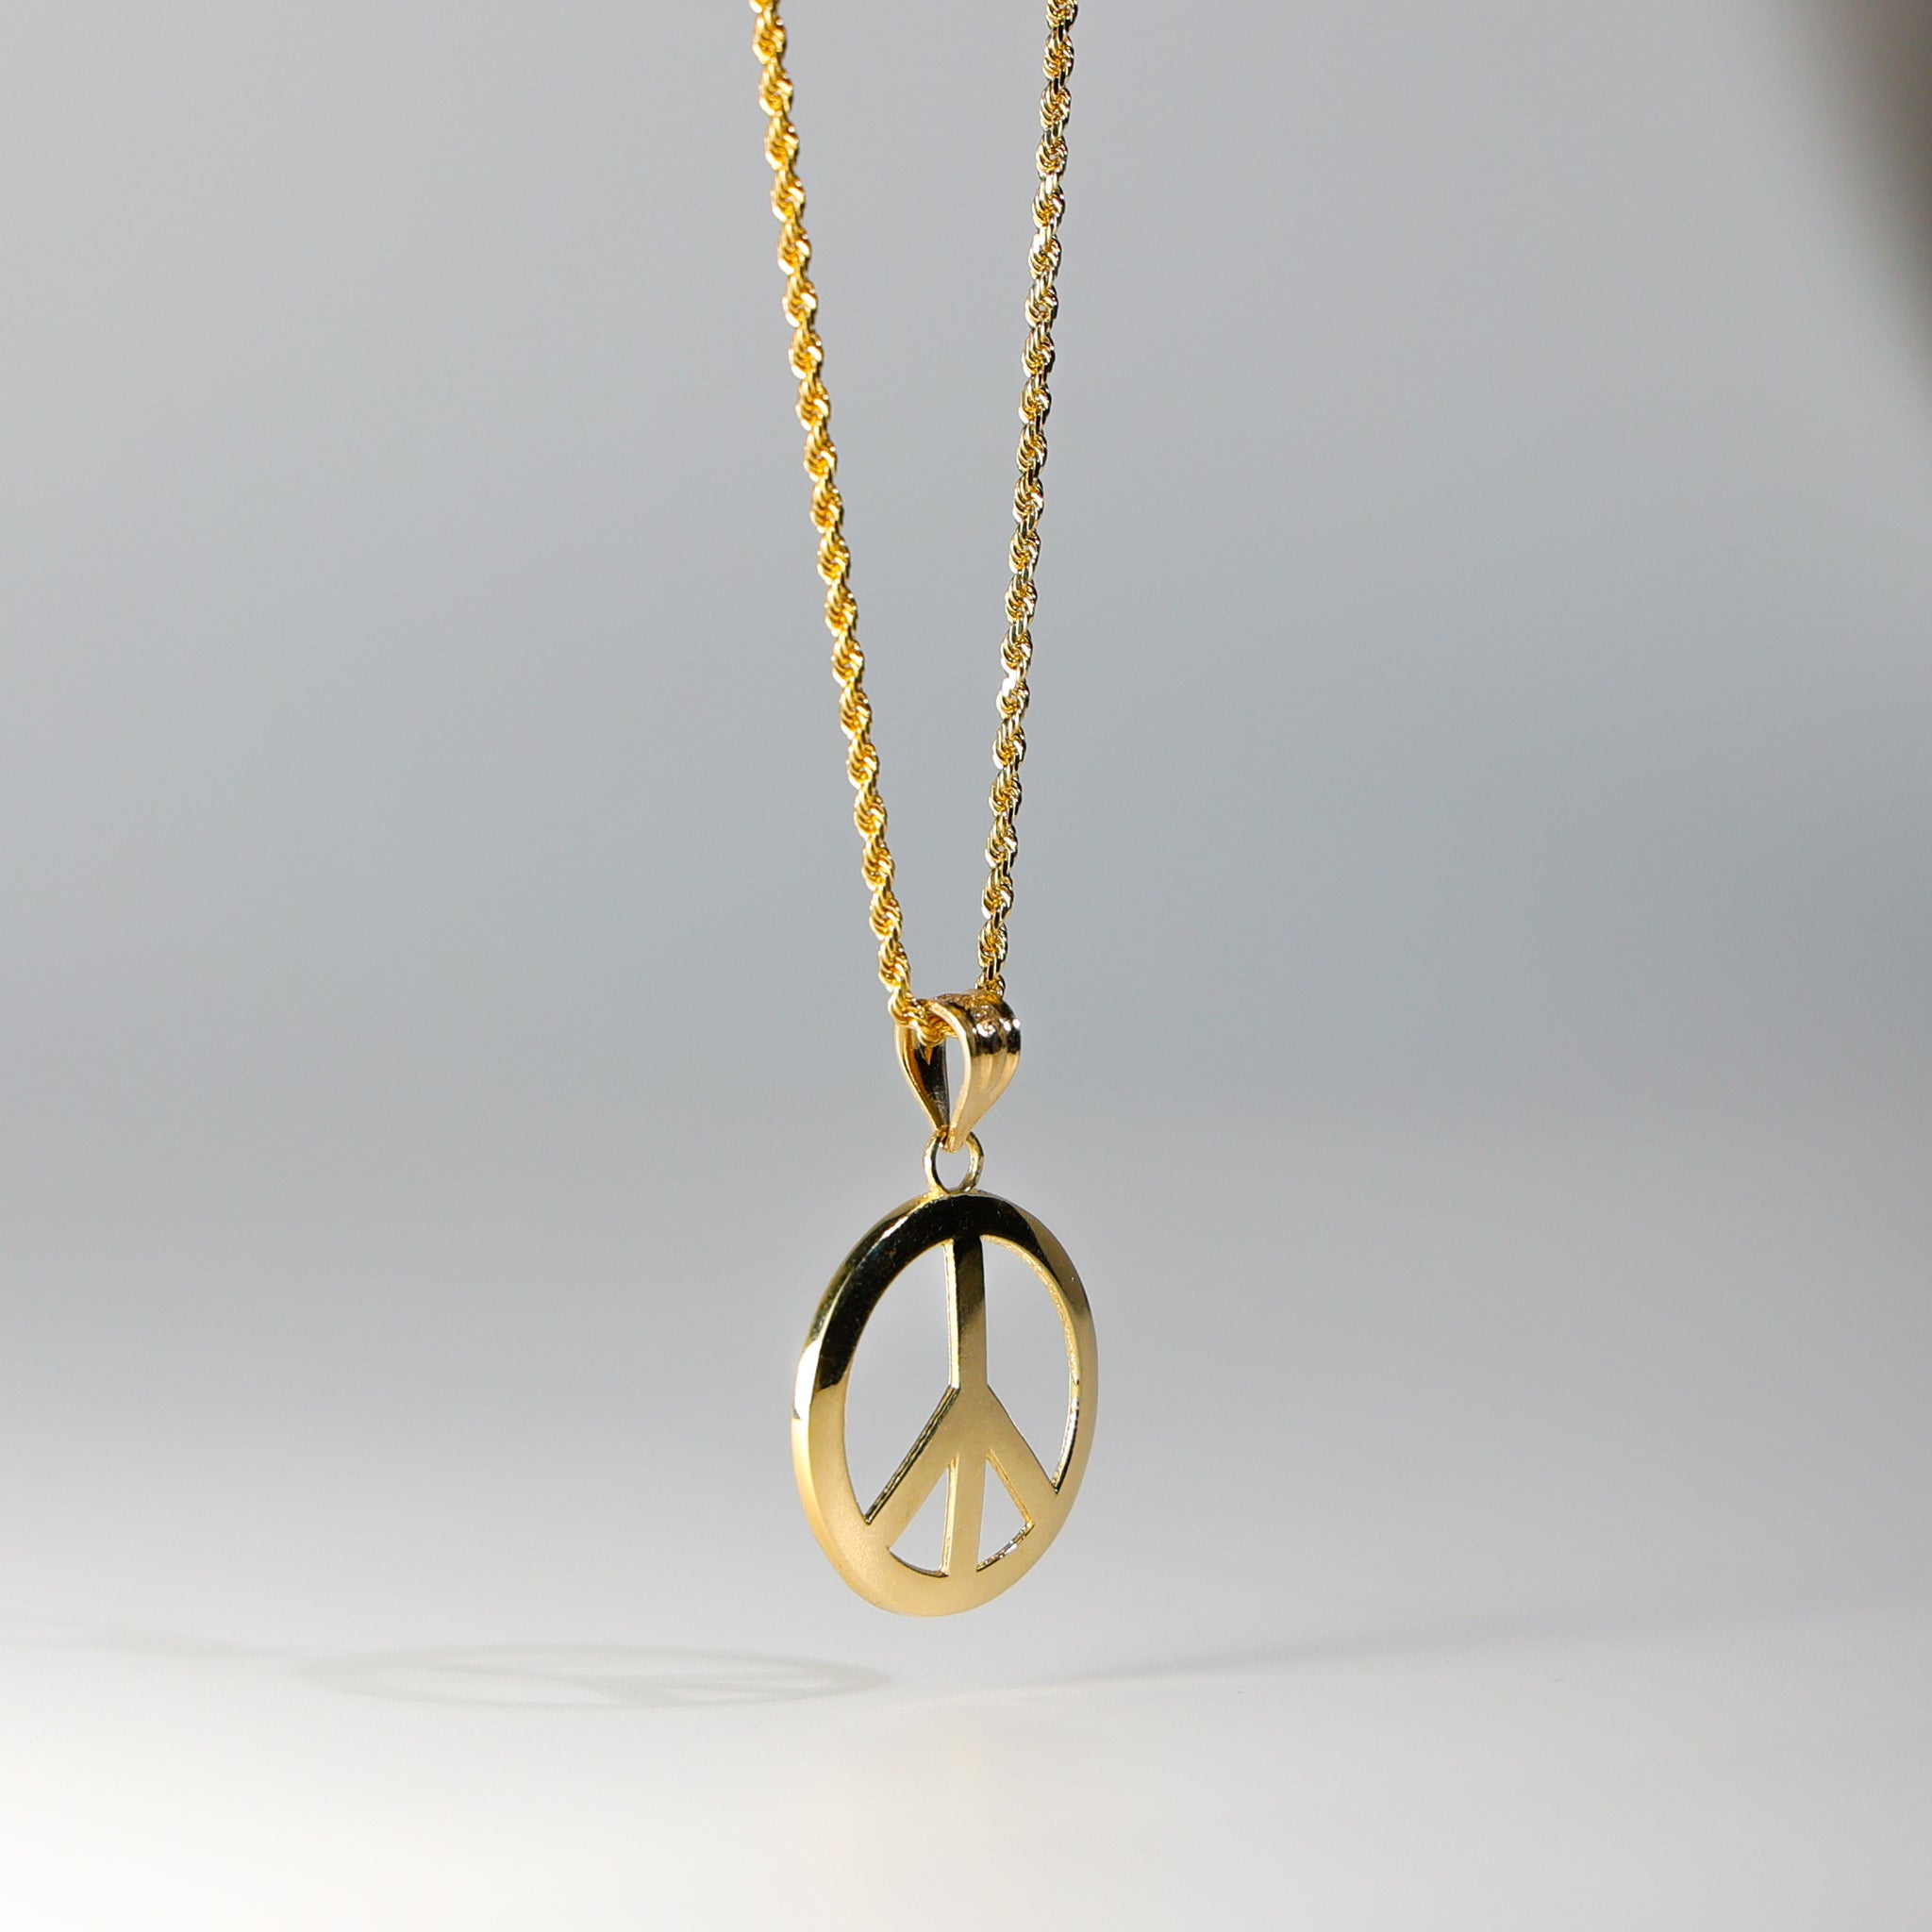 Gold Peace Sign Pendant Model-1736 - Charlie & Co. Jewelry